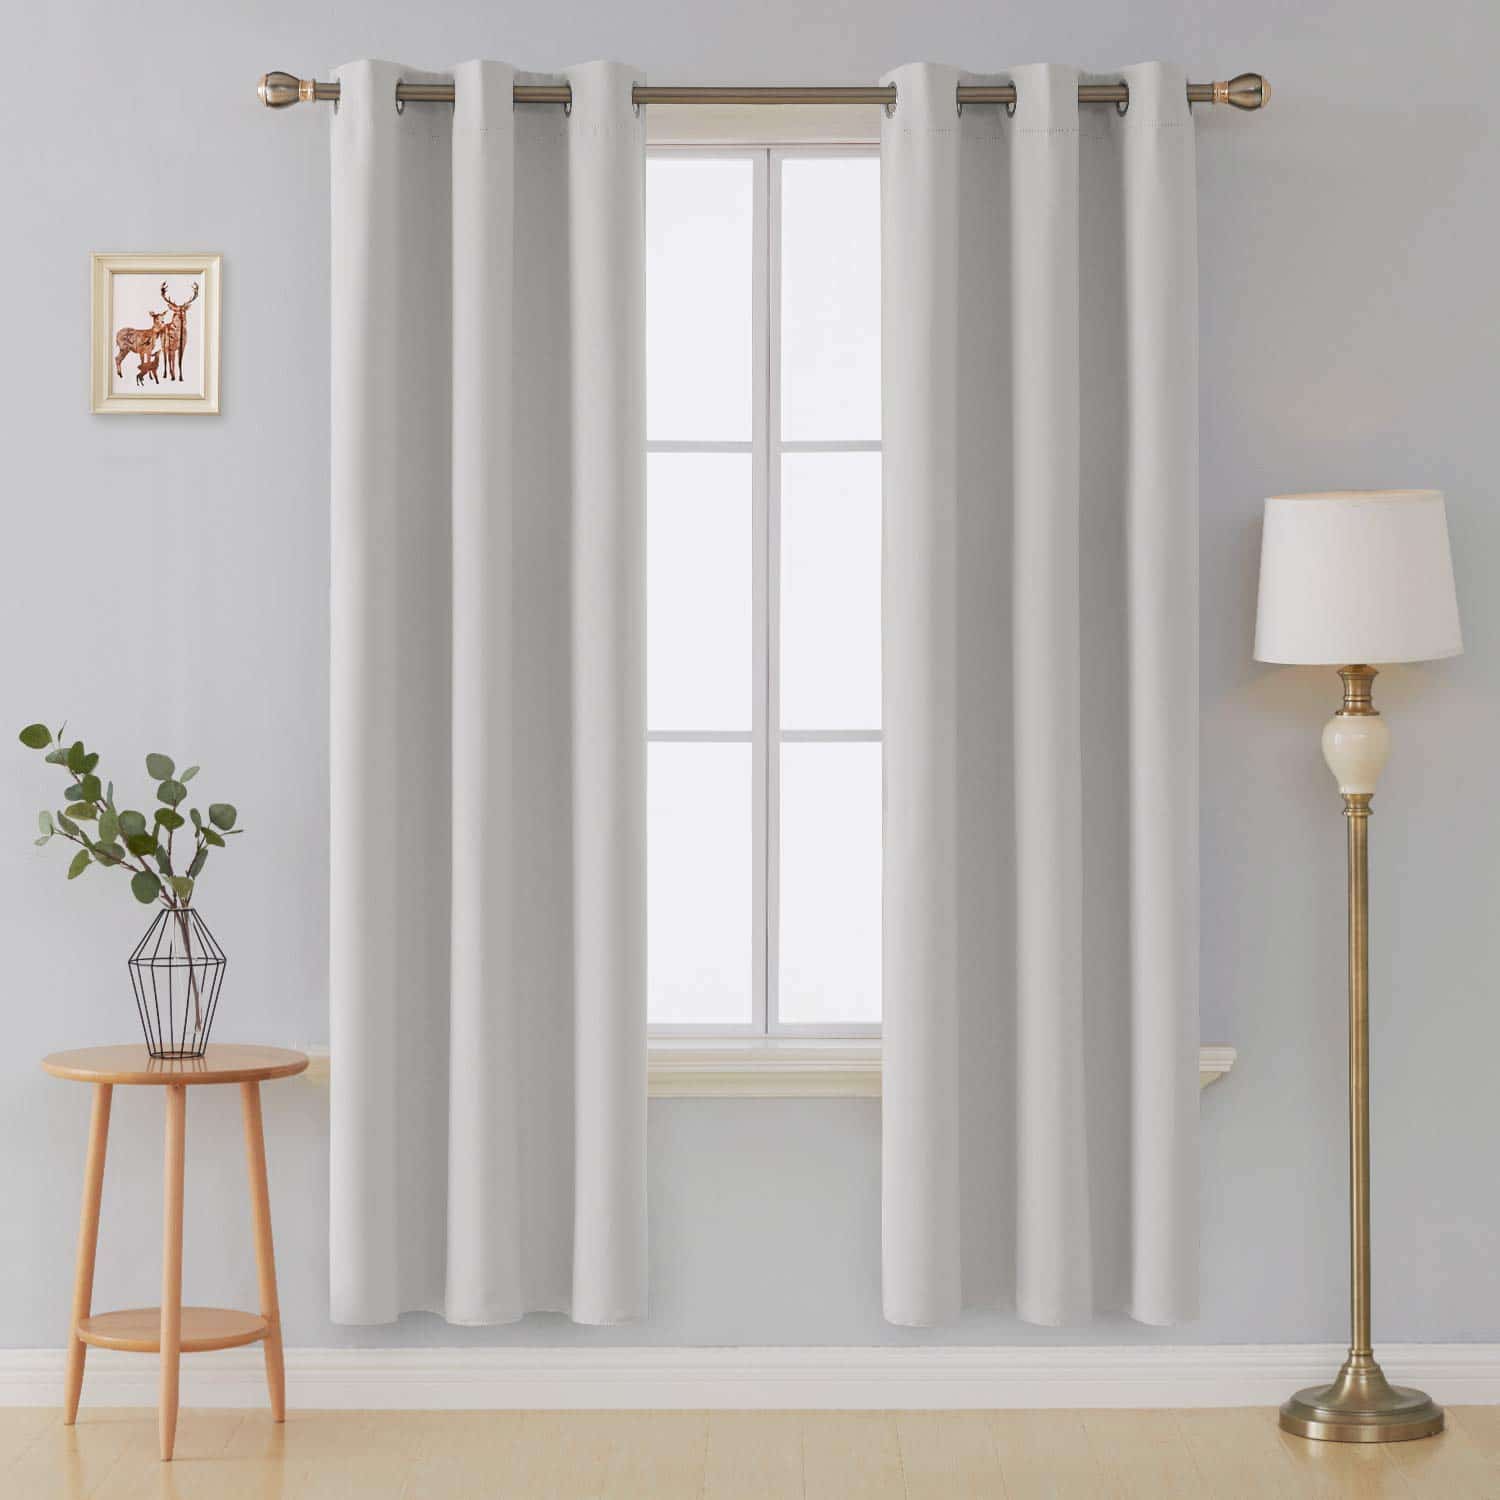 Top 10 Best White Blackout Curtains in 2022 Reviews Home & Kitchen